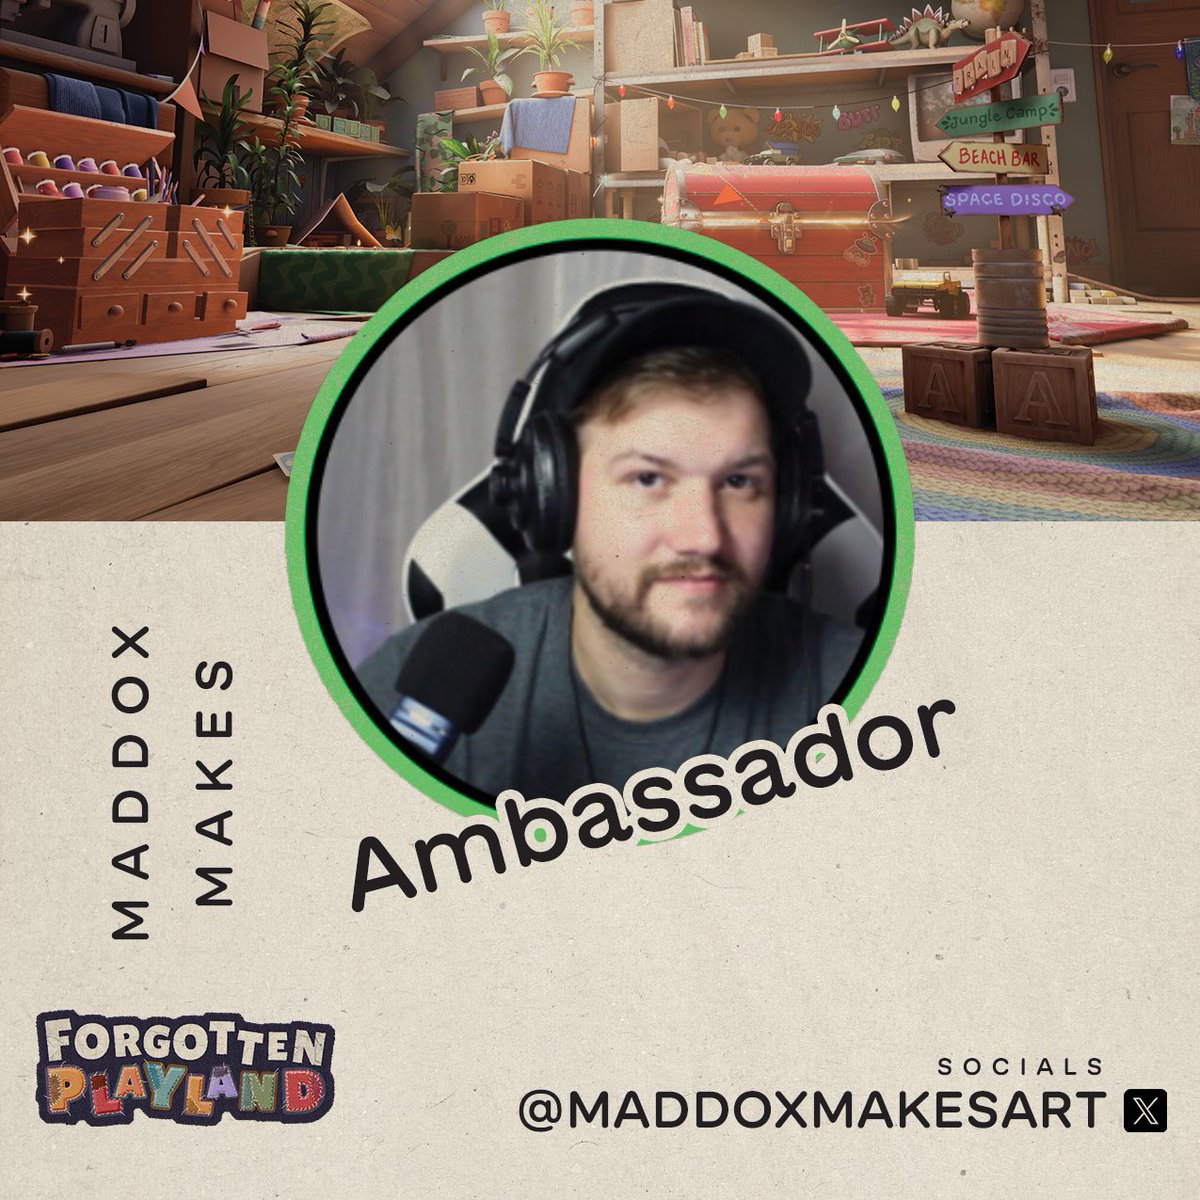 🌟 𝐍𝐄𝐖 𝐀𝐦𝐛𝐚𝐬𝐬𝐚𝐝𝐨𝐫: 𝐌𝐚𝐝𝐝𝐨𝐱 𝐌𝐚𝐤𝐞𝐬 🌟

Rounding out the #FPDreamTeam is the one and only @maddoxmakesart!

Thrilled to announce the final member of the #FPDreamTeam - none other than @maddoxmakesart! 🌟 He's 'kind of' a big deal - and we're feeling lucky to